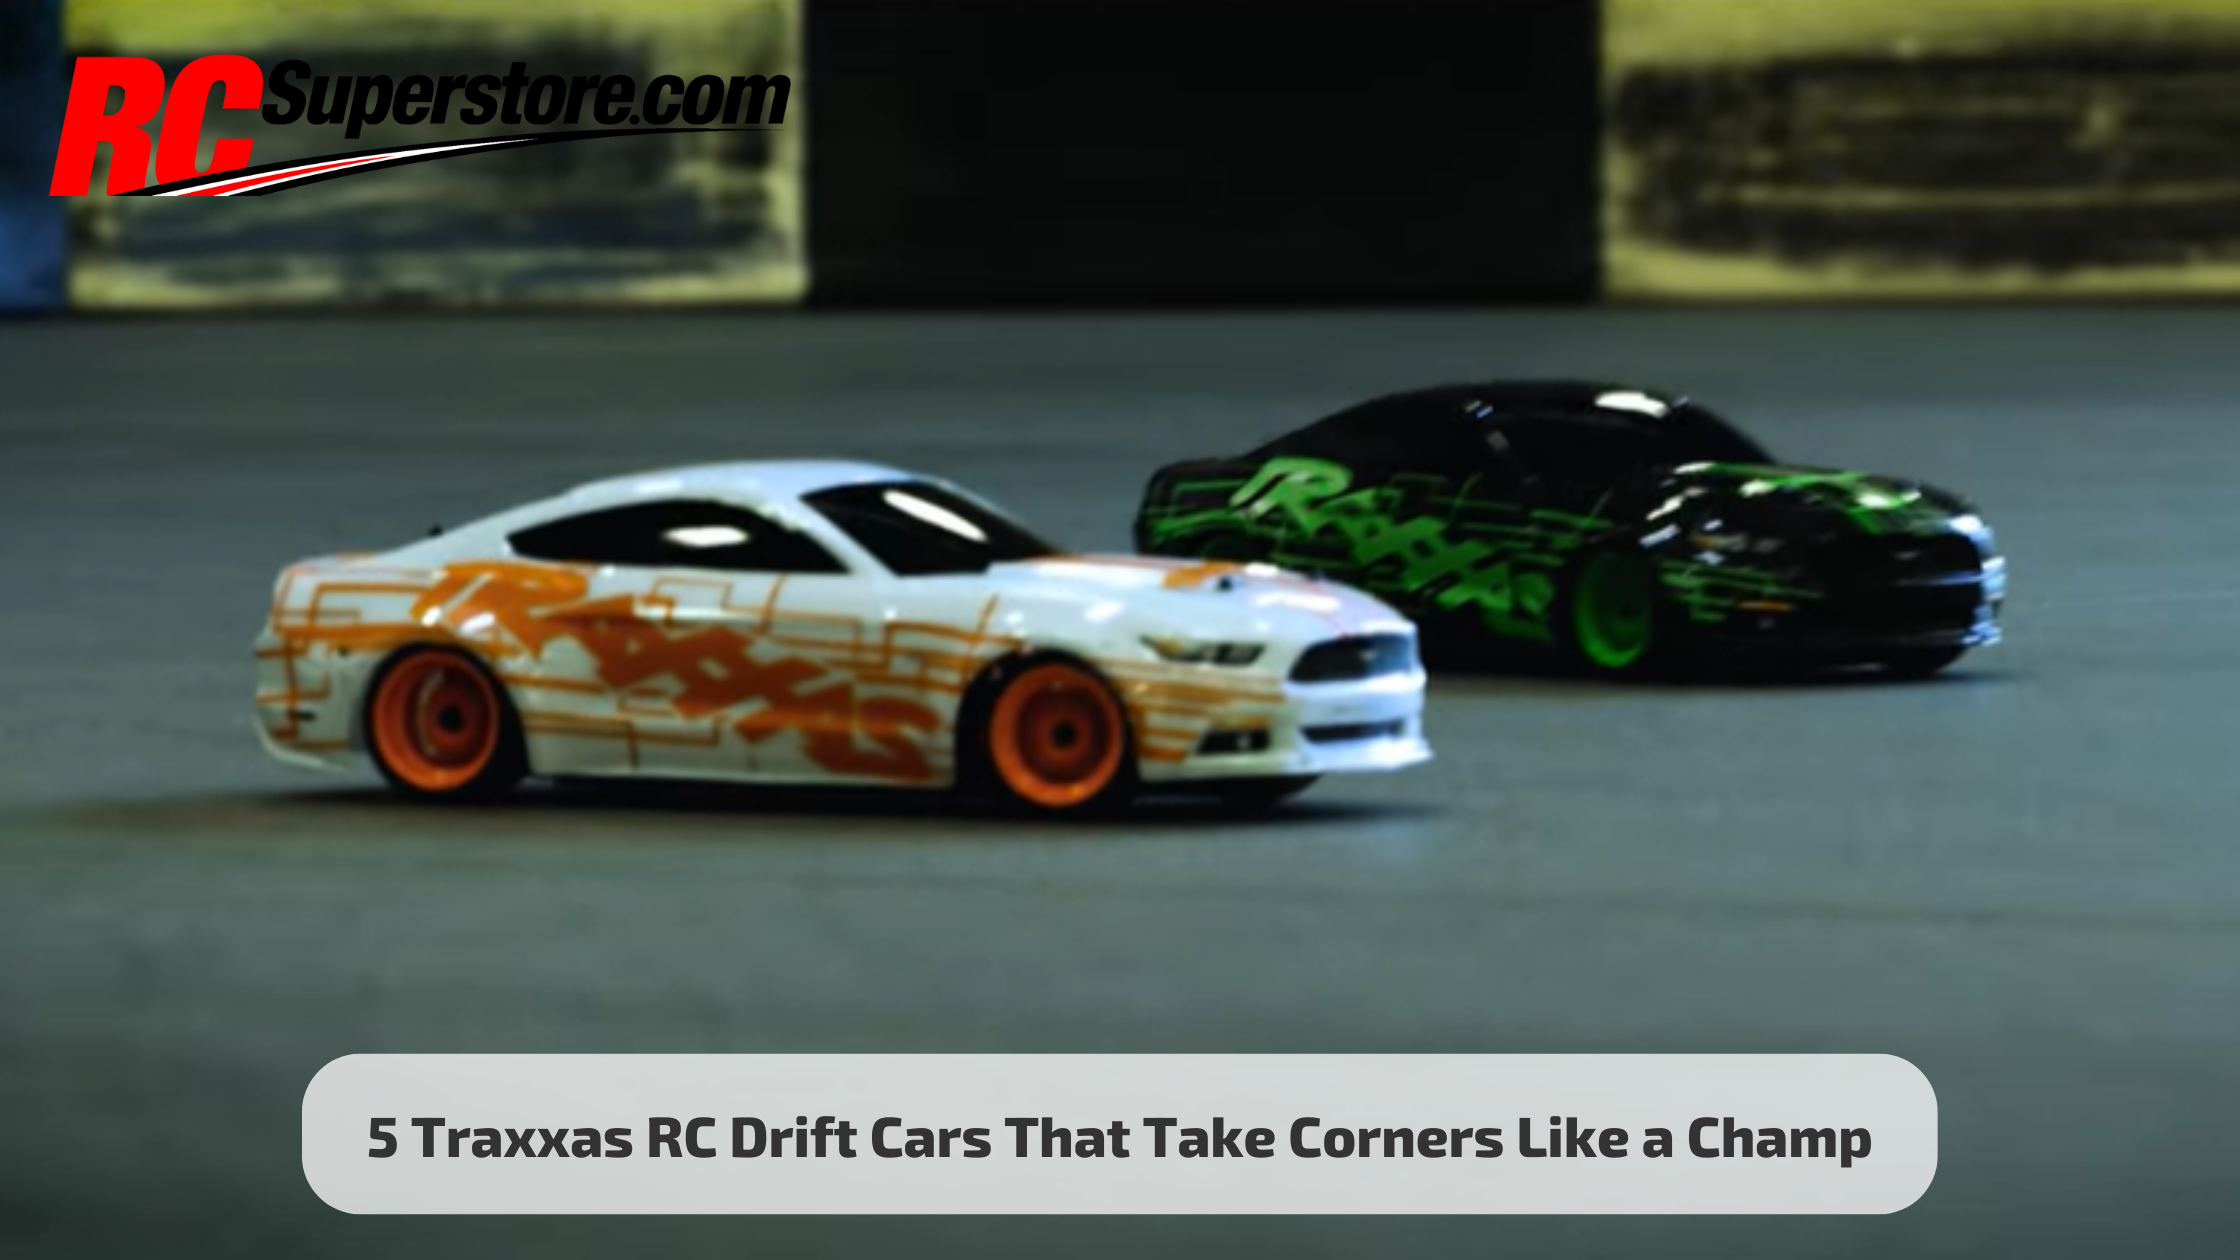 https://www.rcsuperstore.com/product_images/uploaded_images/traxxas-rc-drift-cars-featured-image.png